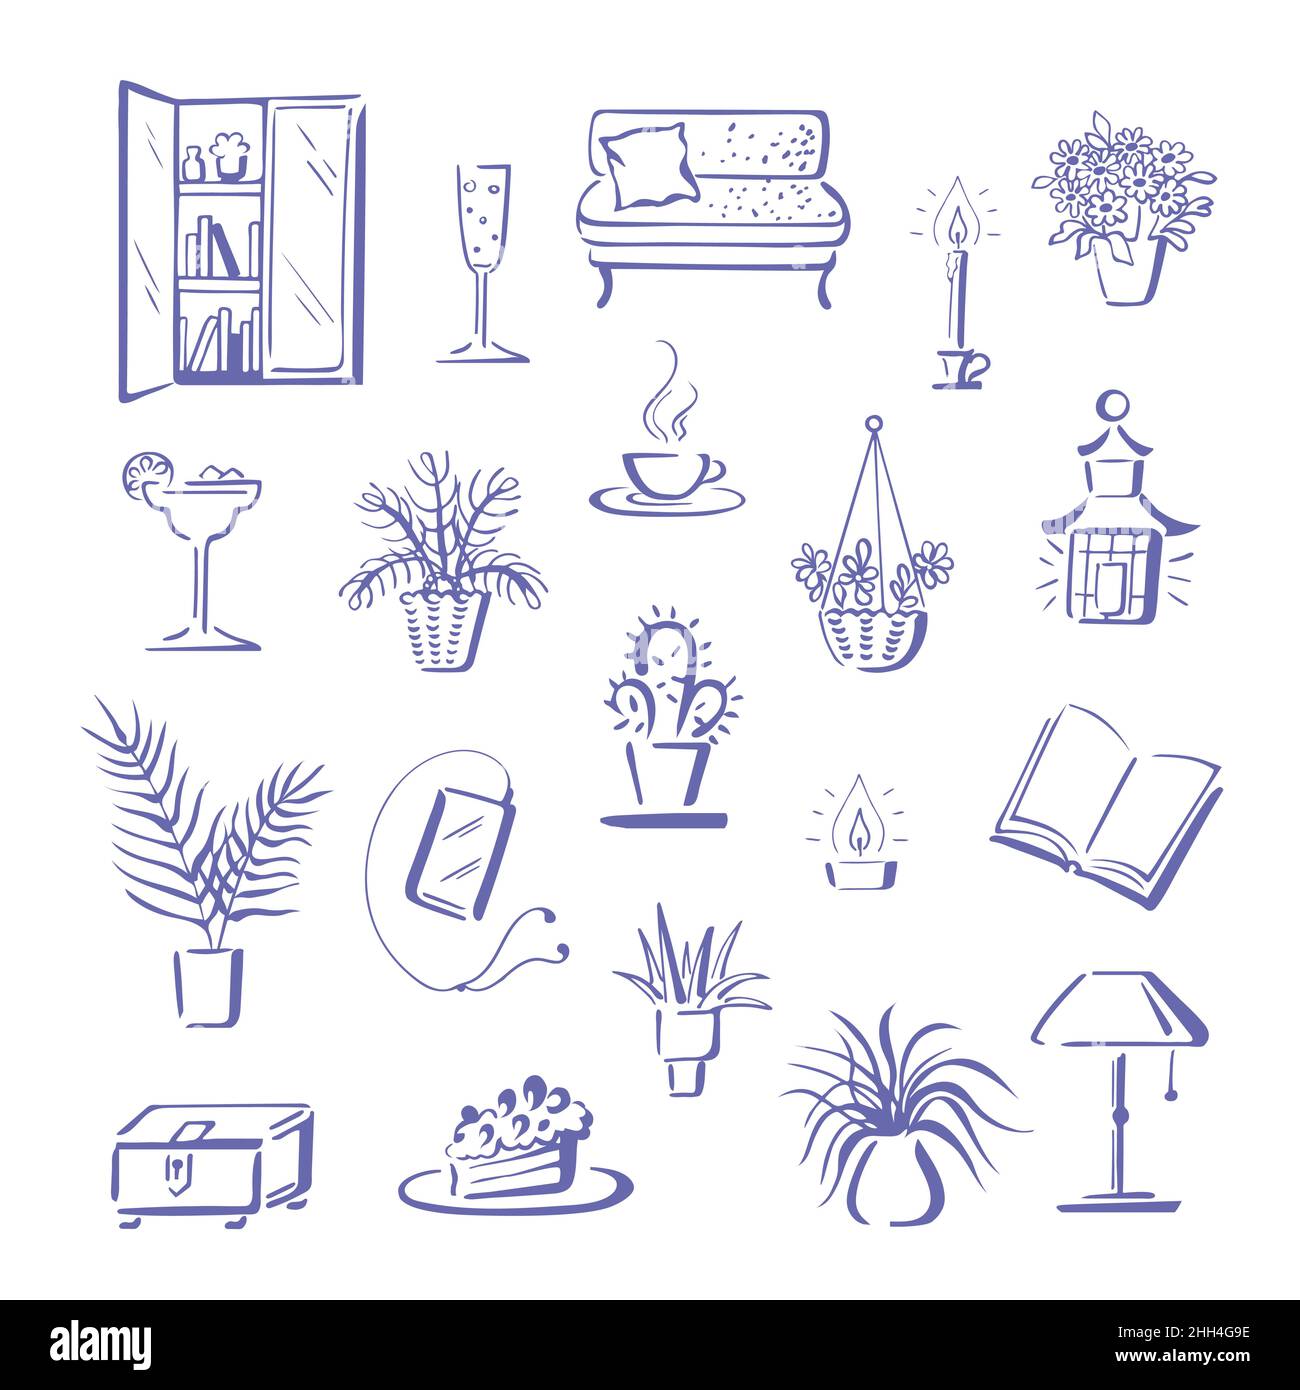 Home hygge, relax mood. Hand-drawn brush doodles of couch or sofa, house plants, book and tablet with earbuds, tealight and candle, cake or pie etc Stock Vector